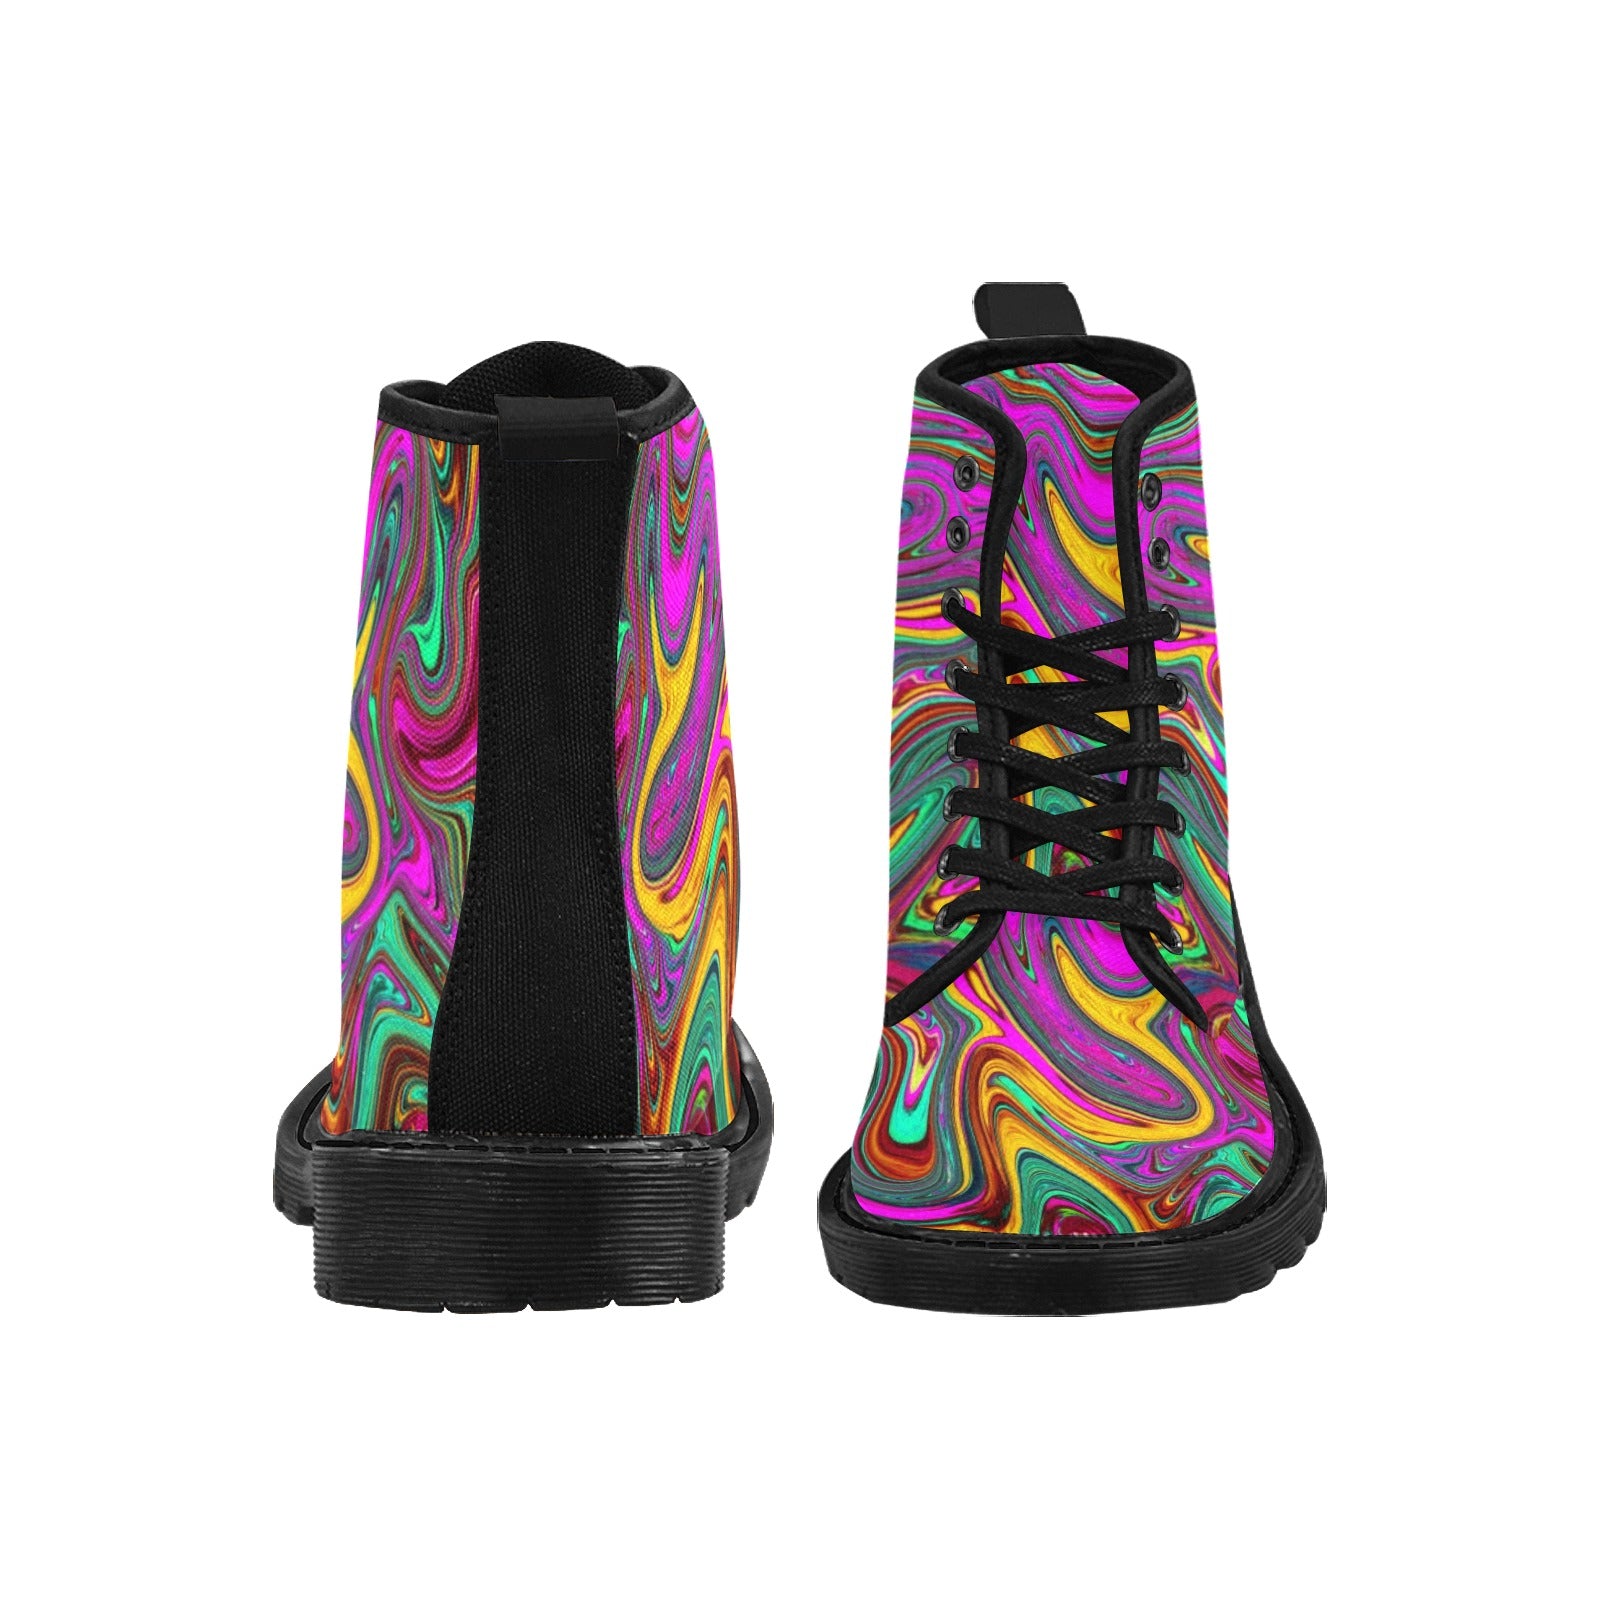 Boots for Women, Marbled Hot Pink and Sea Foam Green Abstract Art - Black